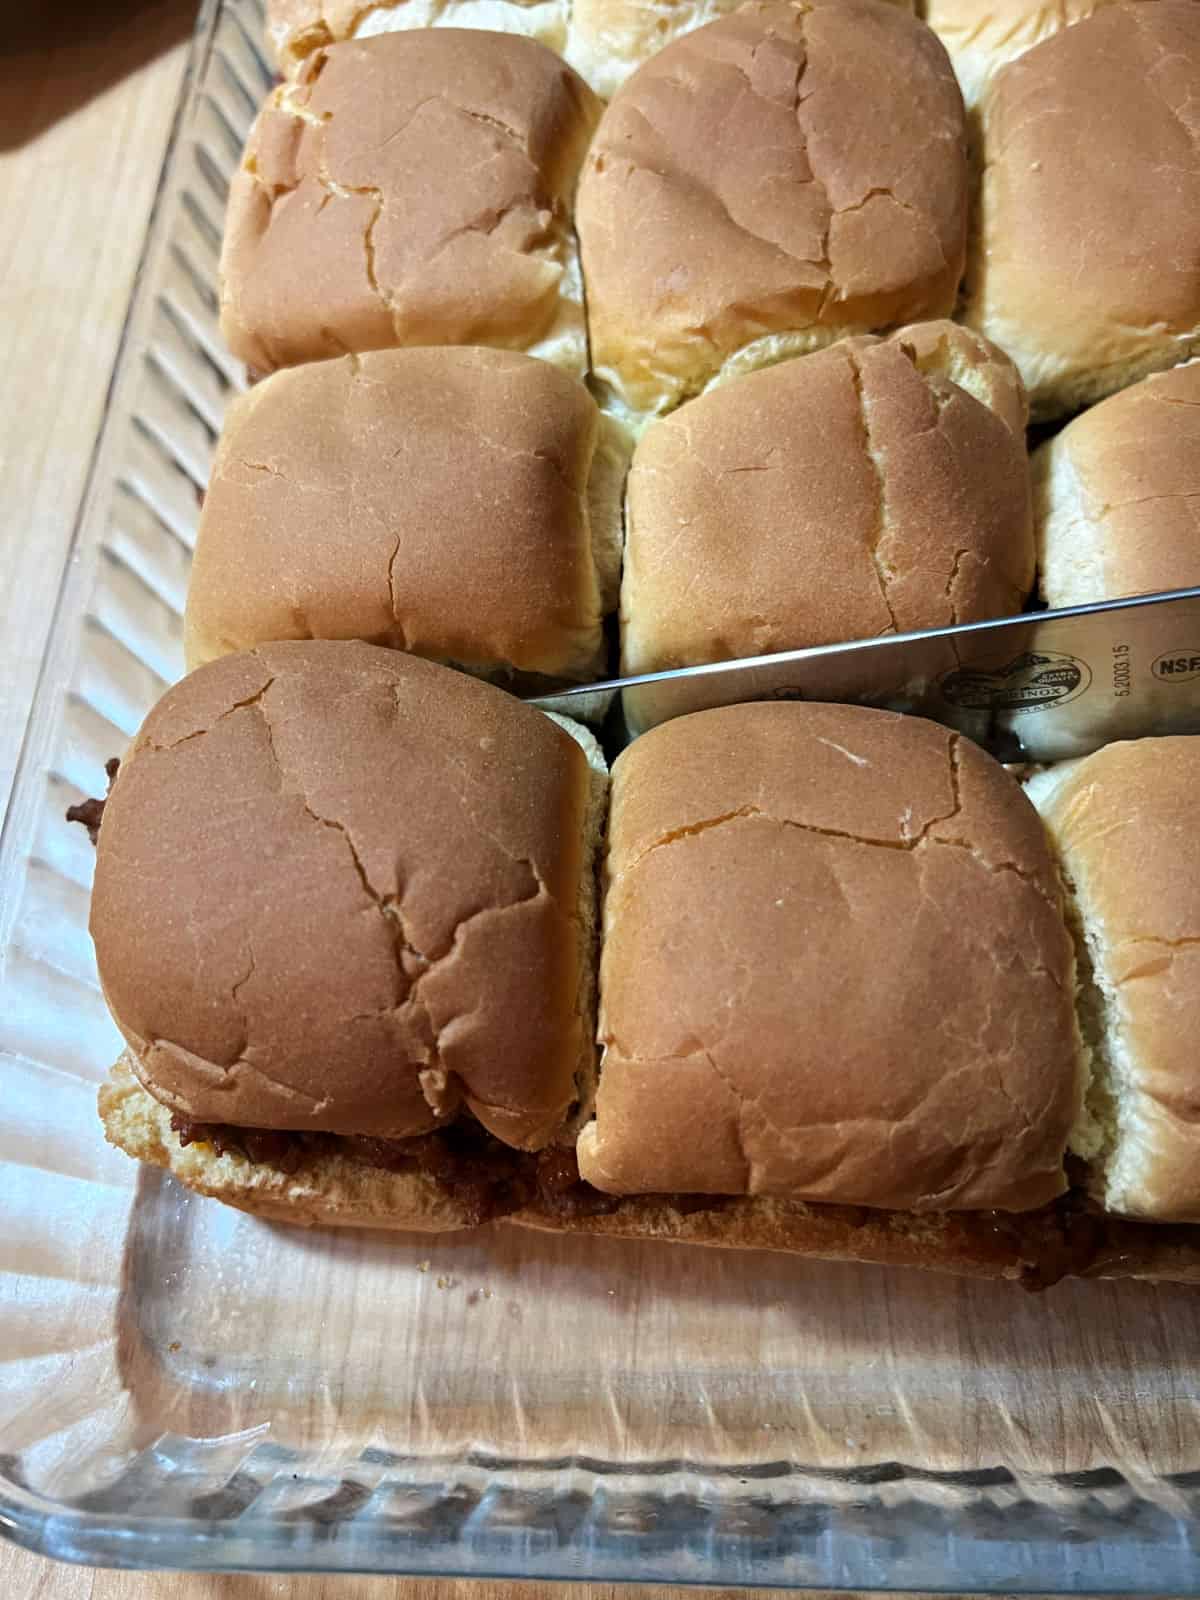 knife cutting the individual sloppy joe sliders from the group.